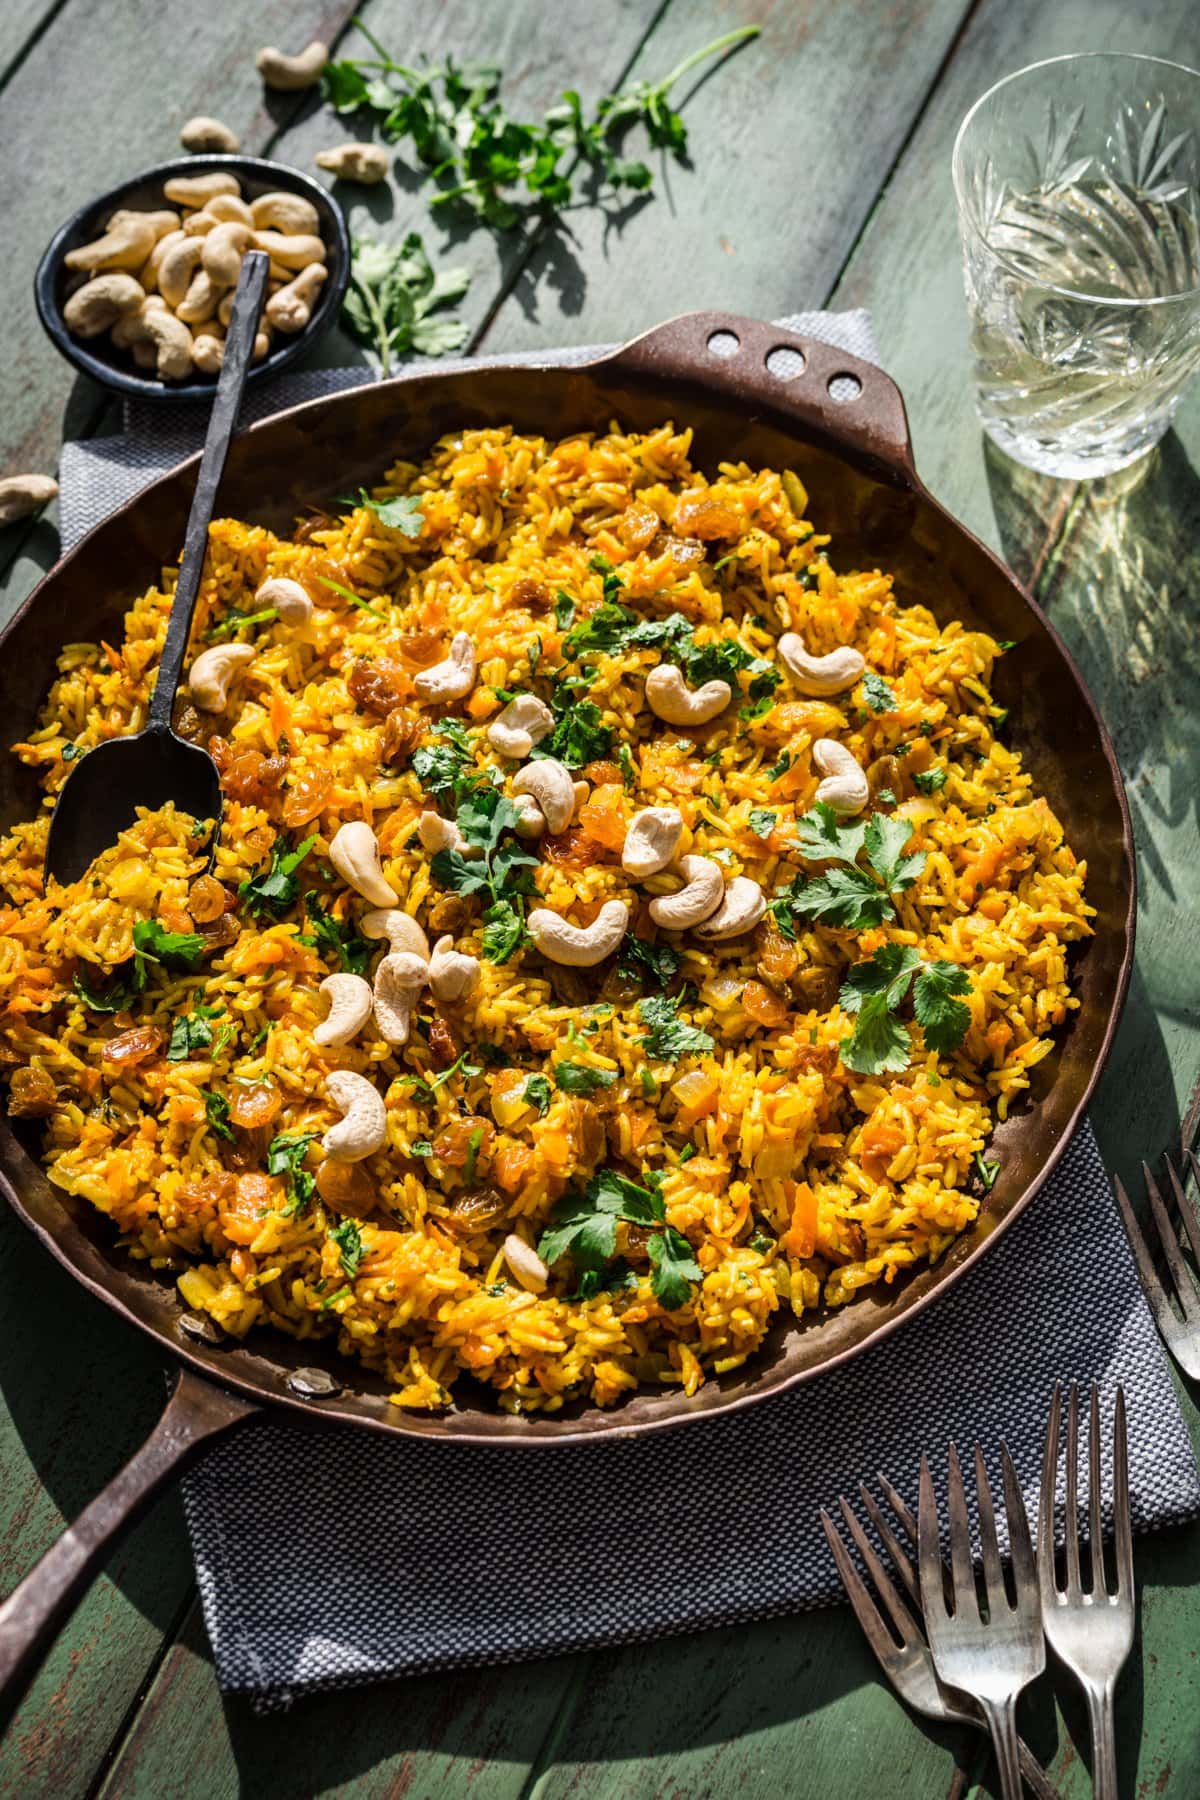 Overhead view of carrot rice in a pan, garnished with golden raisins, cilantro, and cashews.